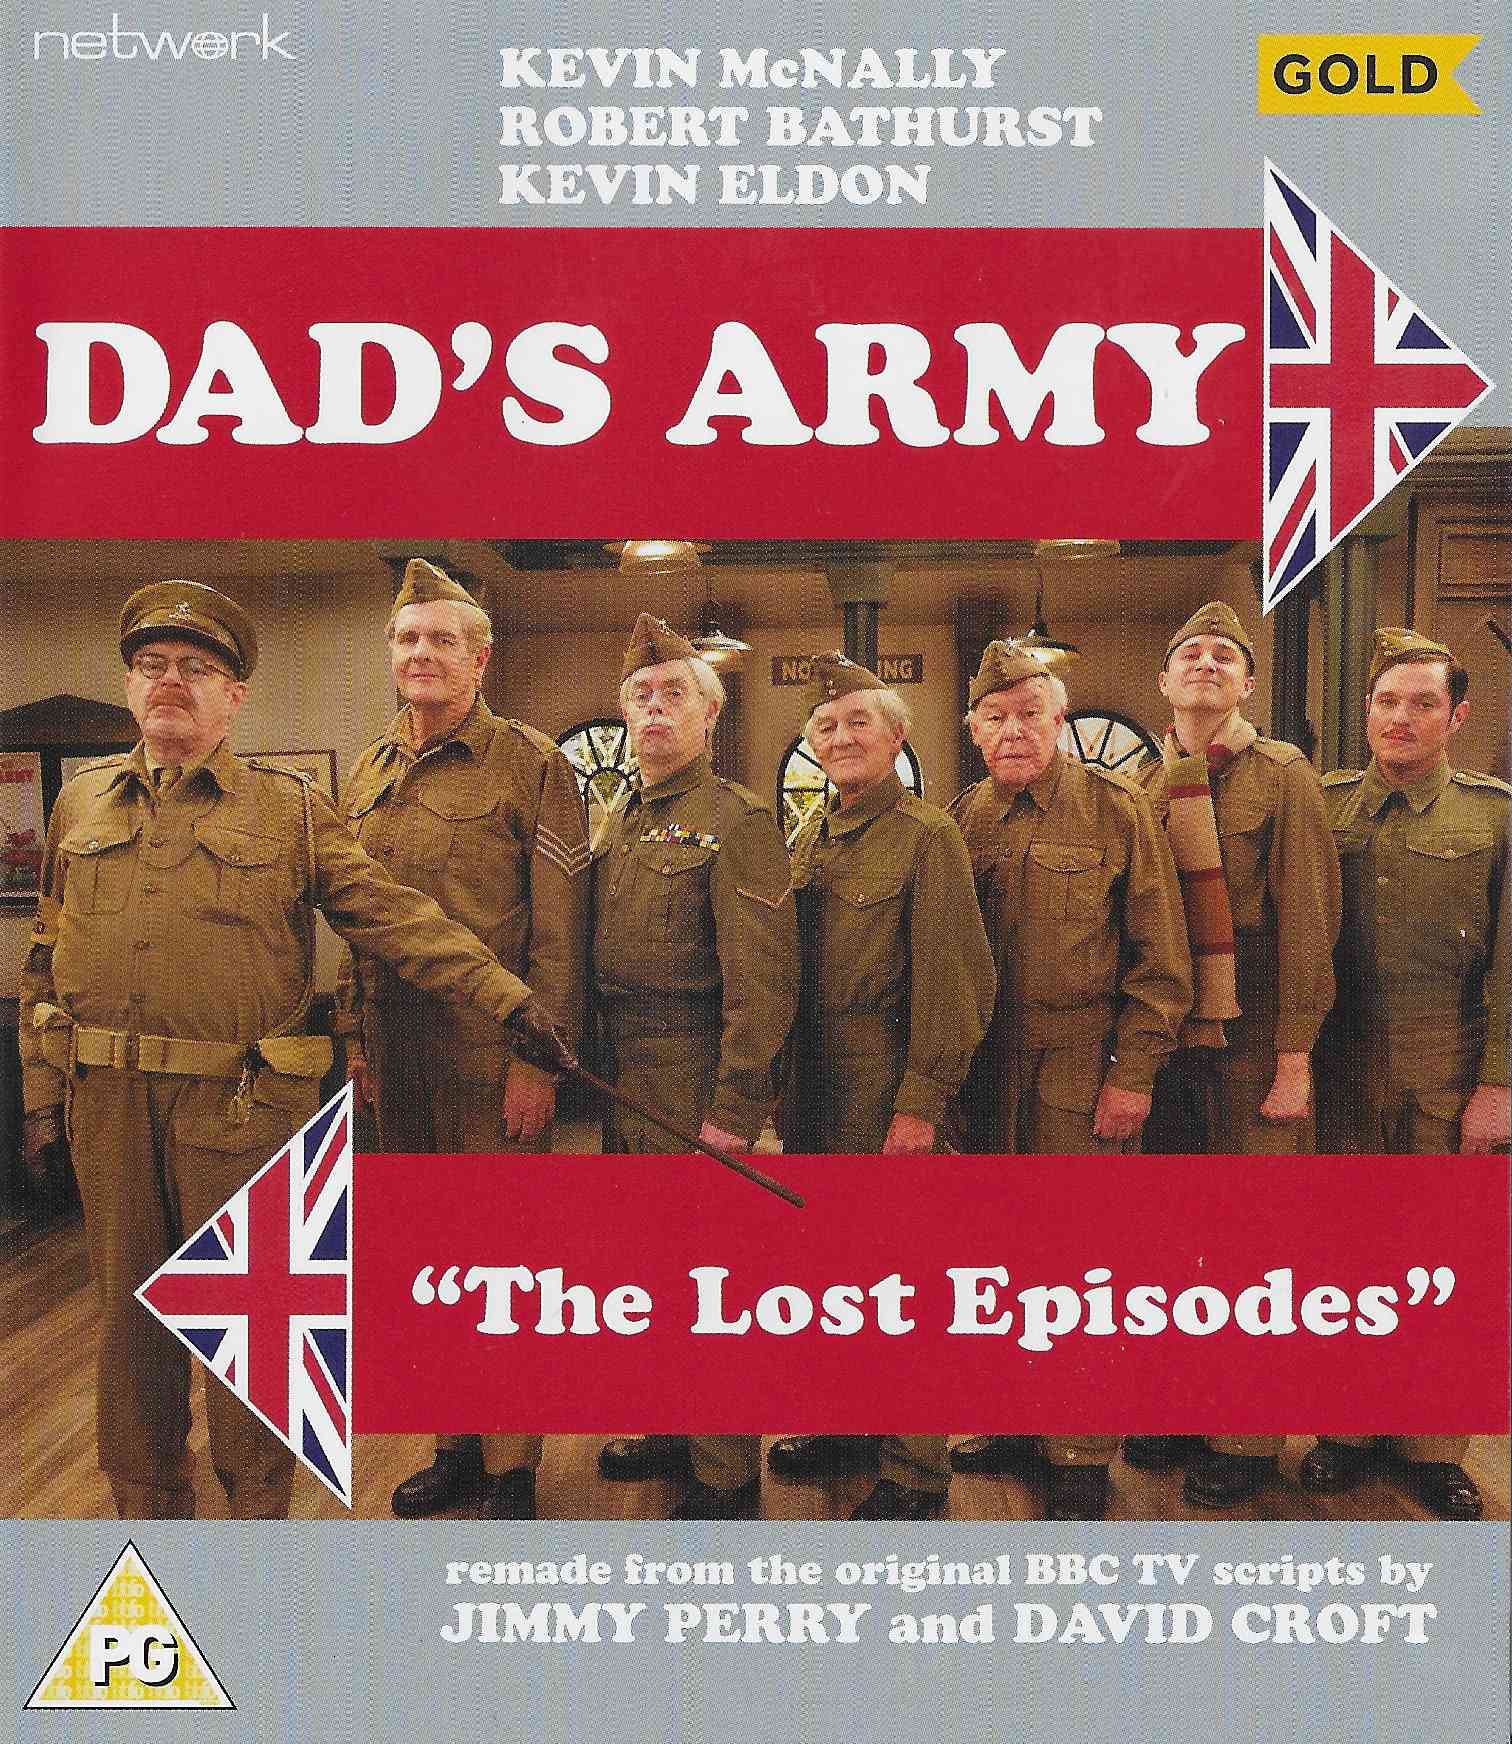 Picture of Dad's army - The lost episodes by artist Jimmy Perry / David Croft from the BBC blu-rays - Records and Tapes library